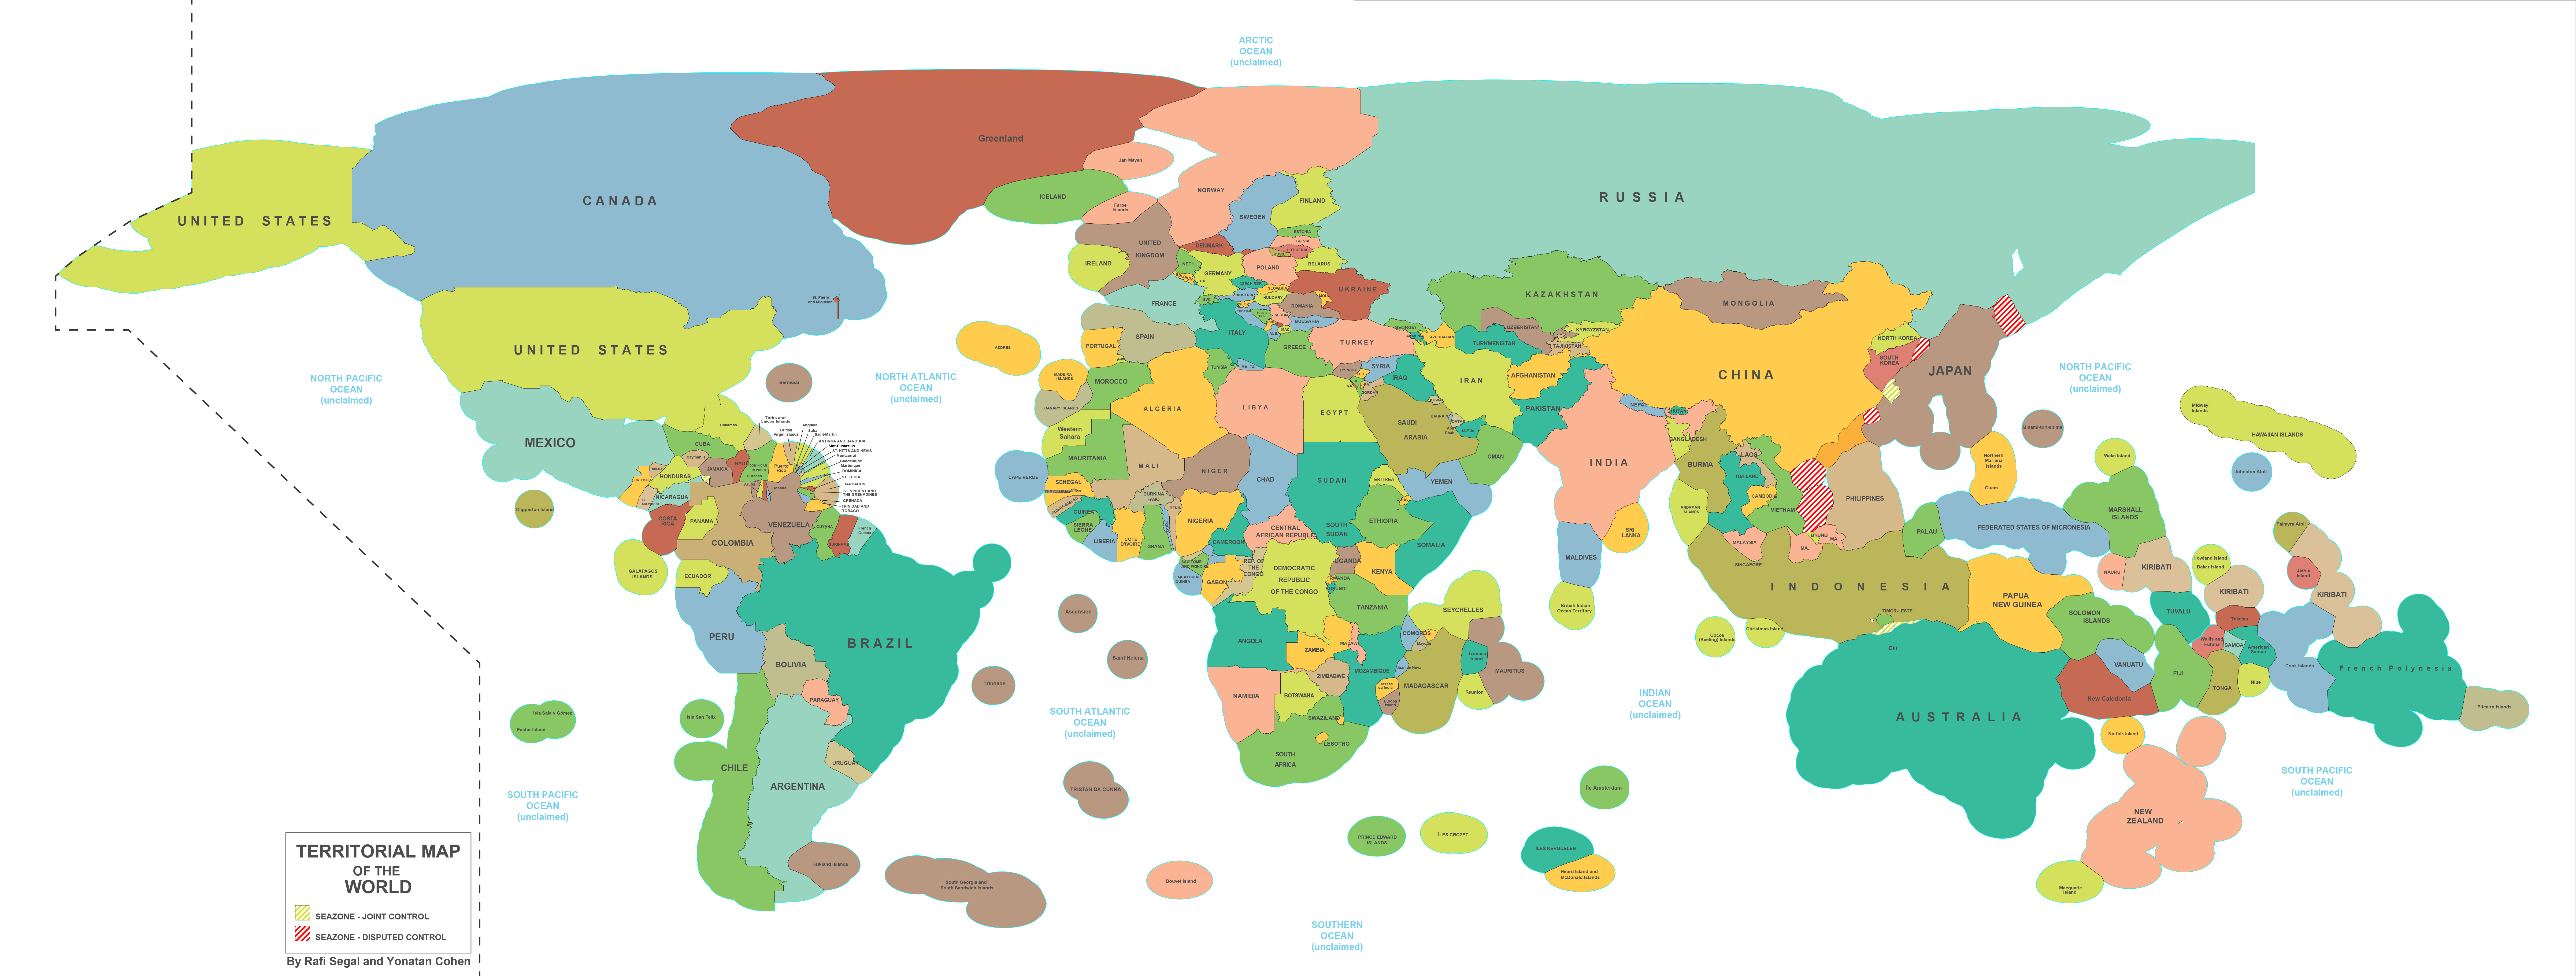 Fascinating world map includes countries’ ocean territory in their